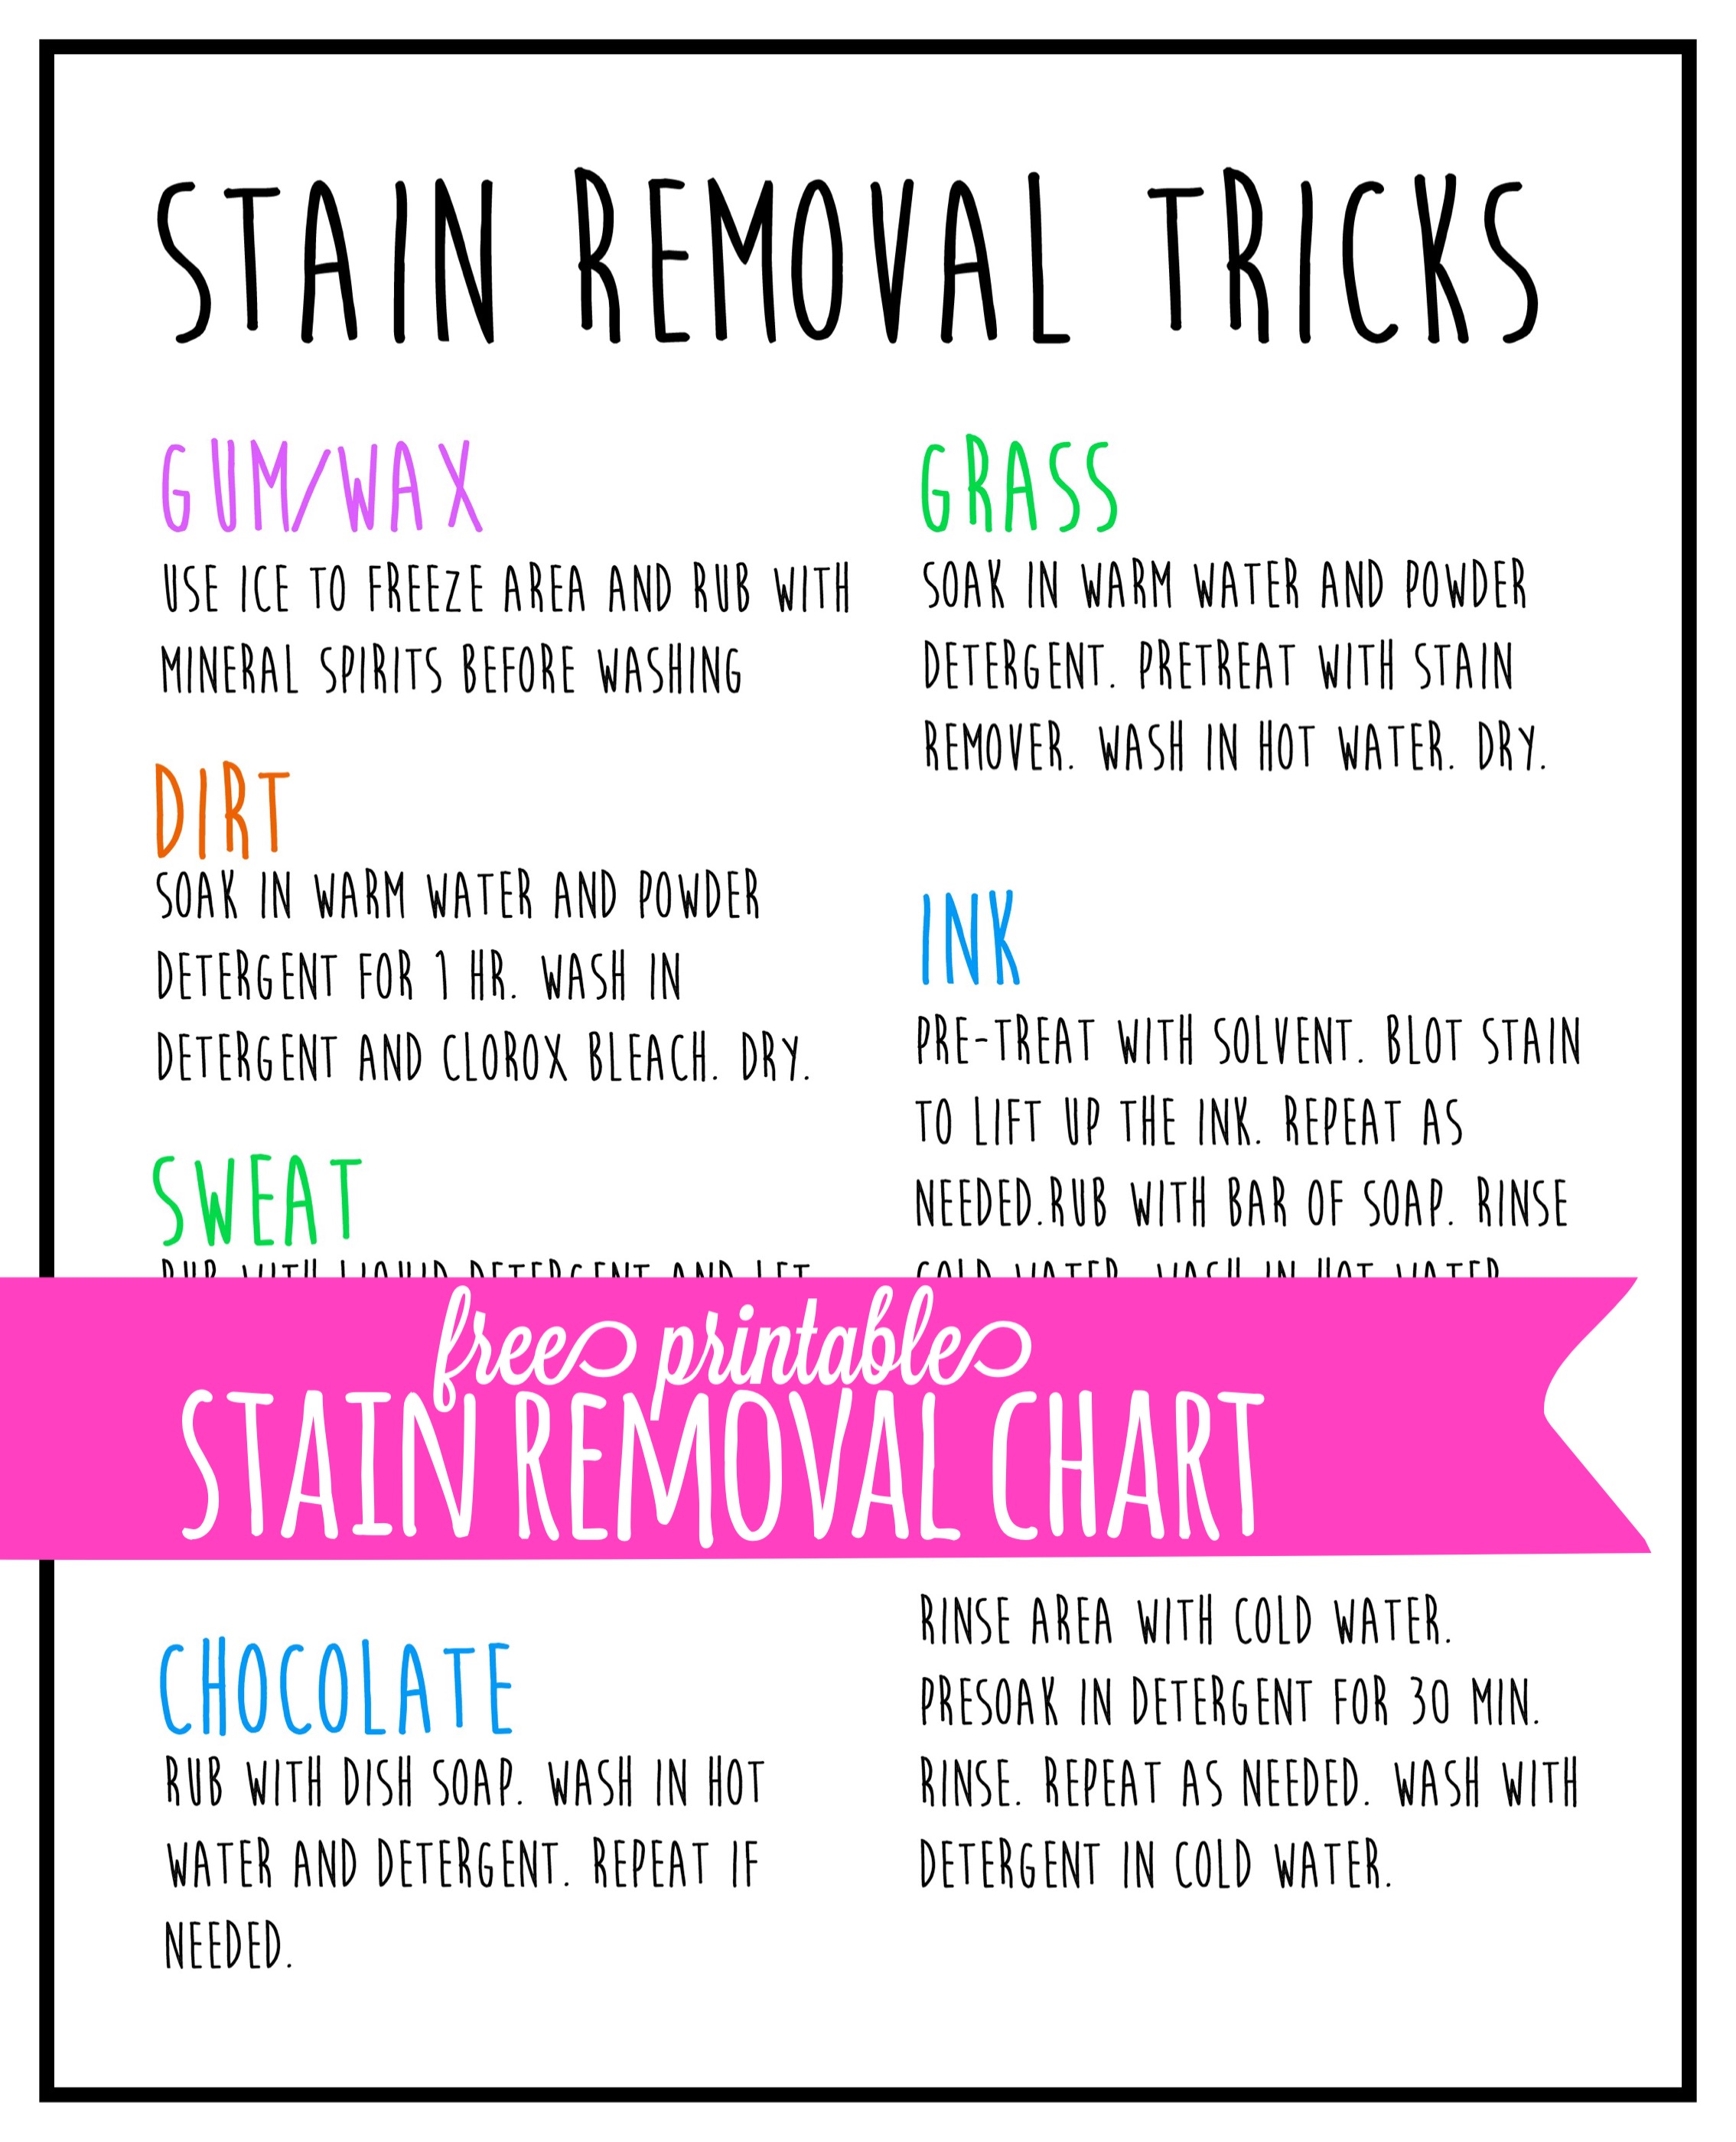 Stain Removal Chart Printable and favorite spring cleaning tricks!